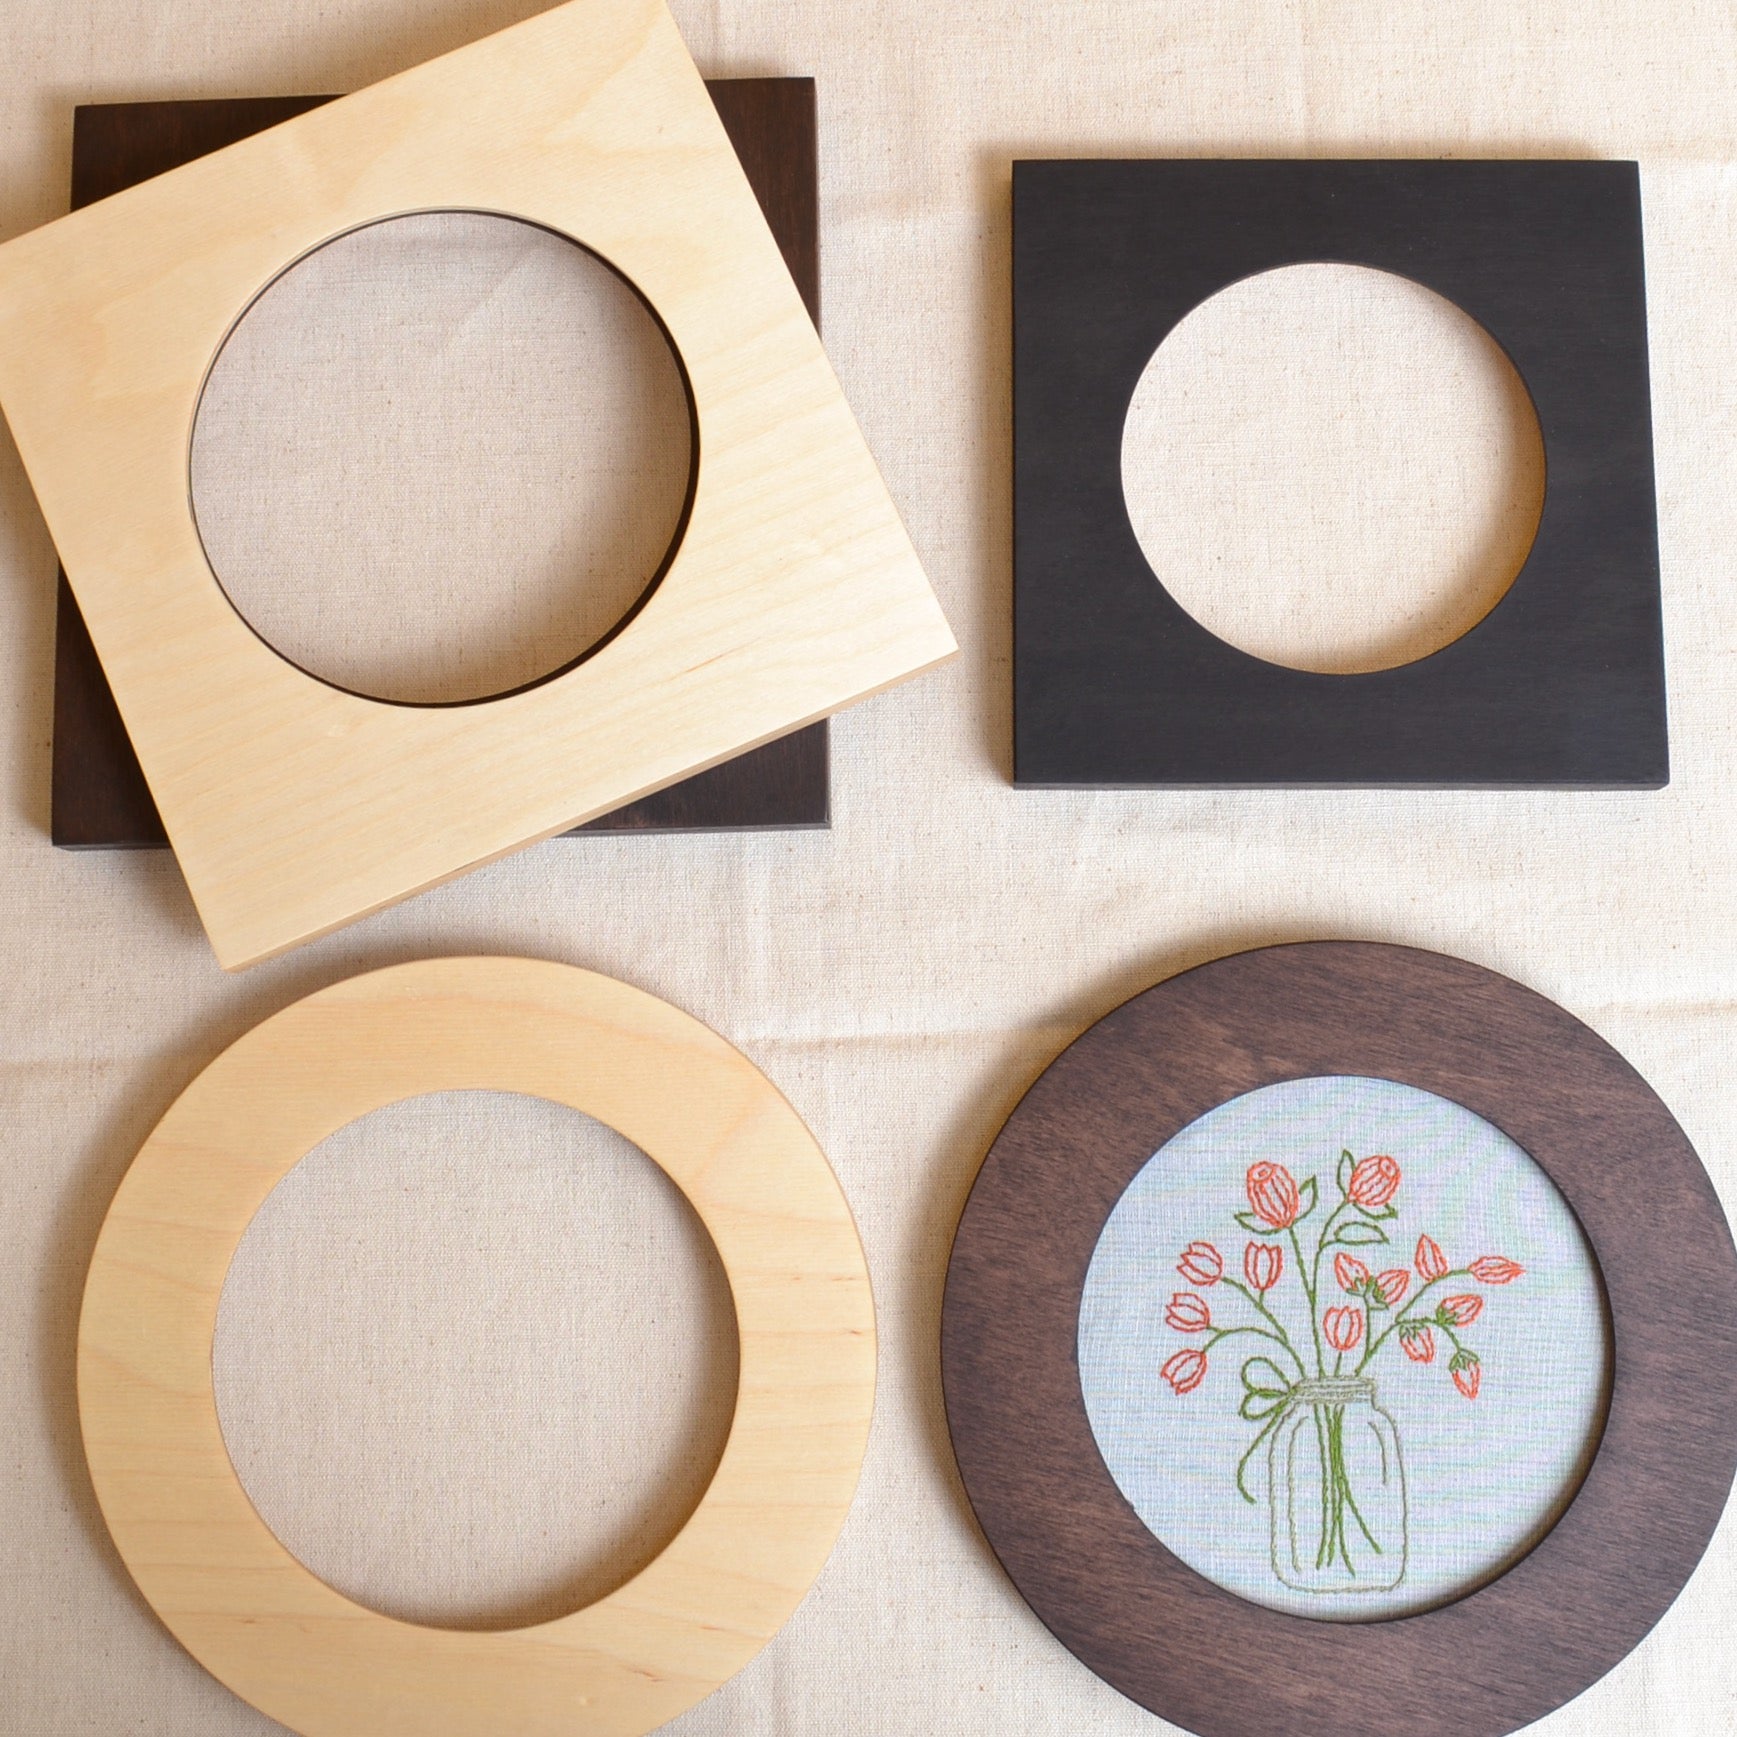 4 Pcs Wood Embroidery Hoop Frame 6 Inch Round Wooden Embroidery Frame Wood  Display Frame Circle for Finished Cross Stitch Hoop DIY Art Craft Sewing